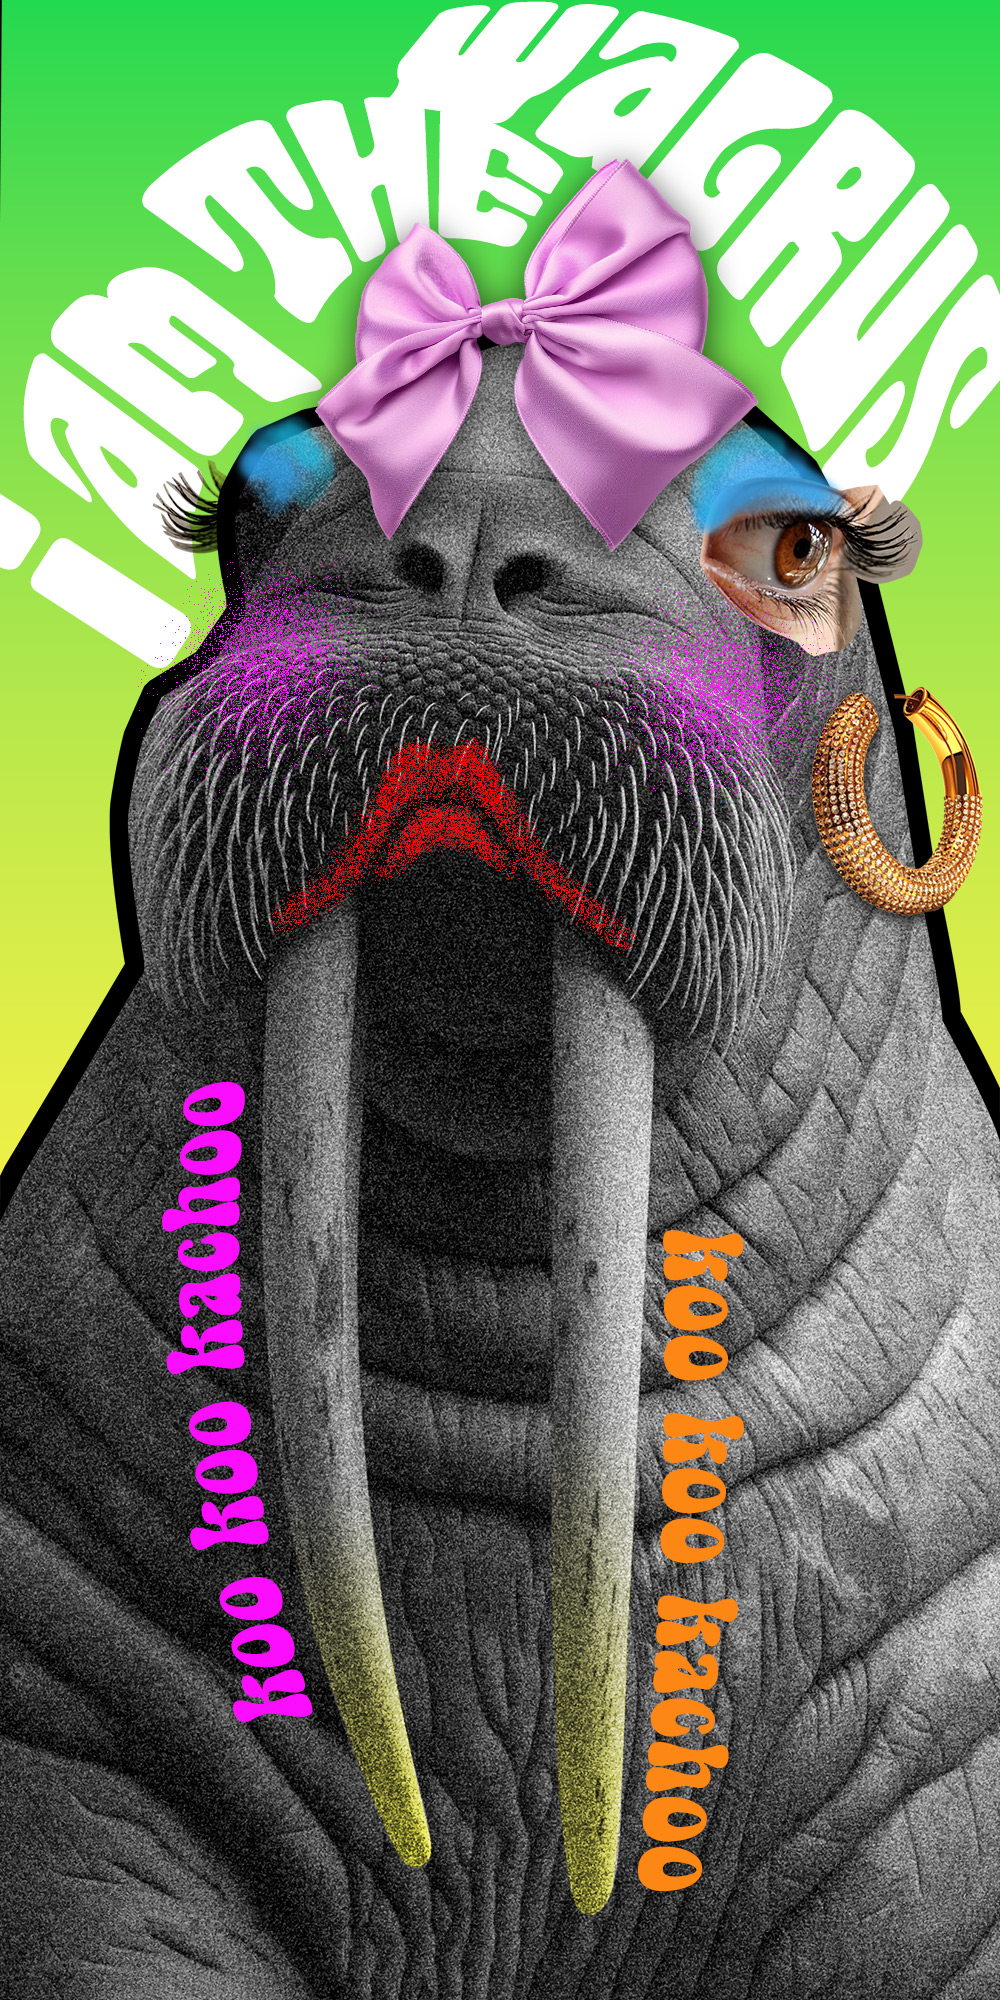 Jeff Kern design for "I am the Walrus"